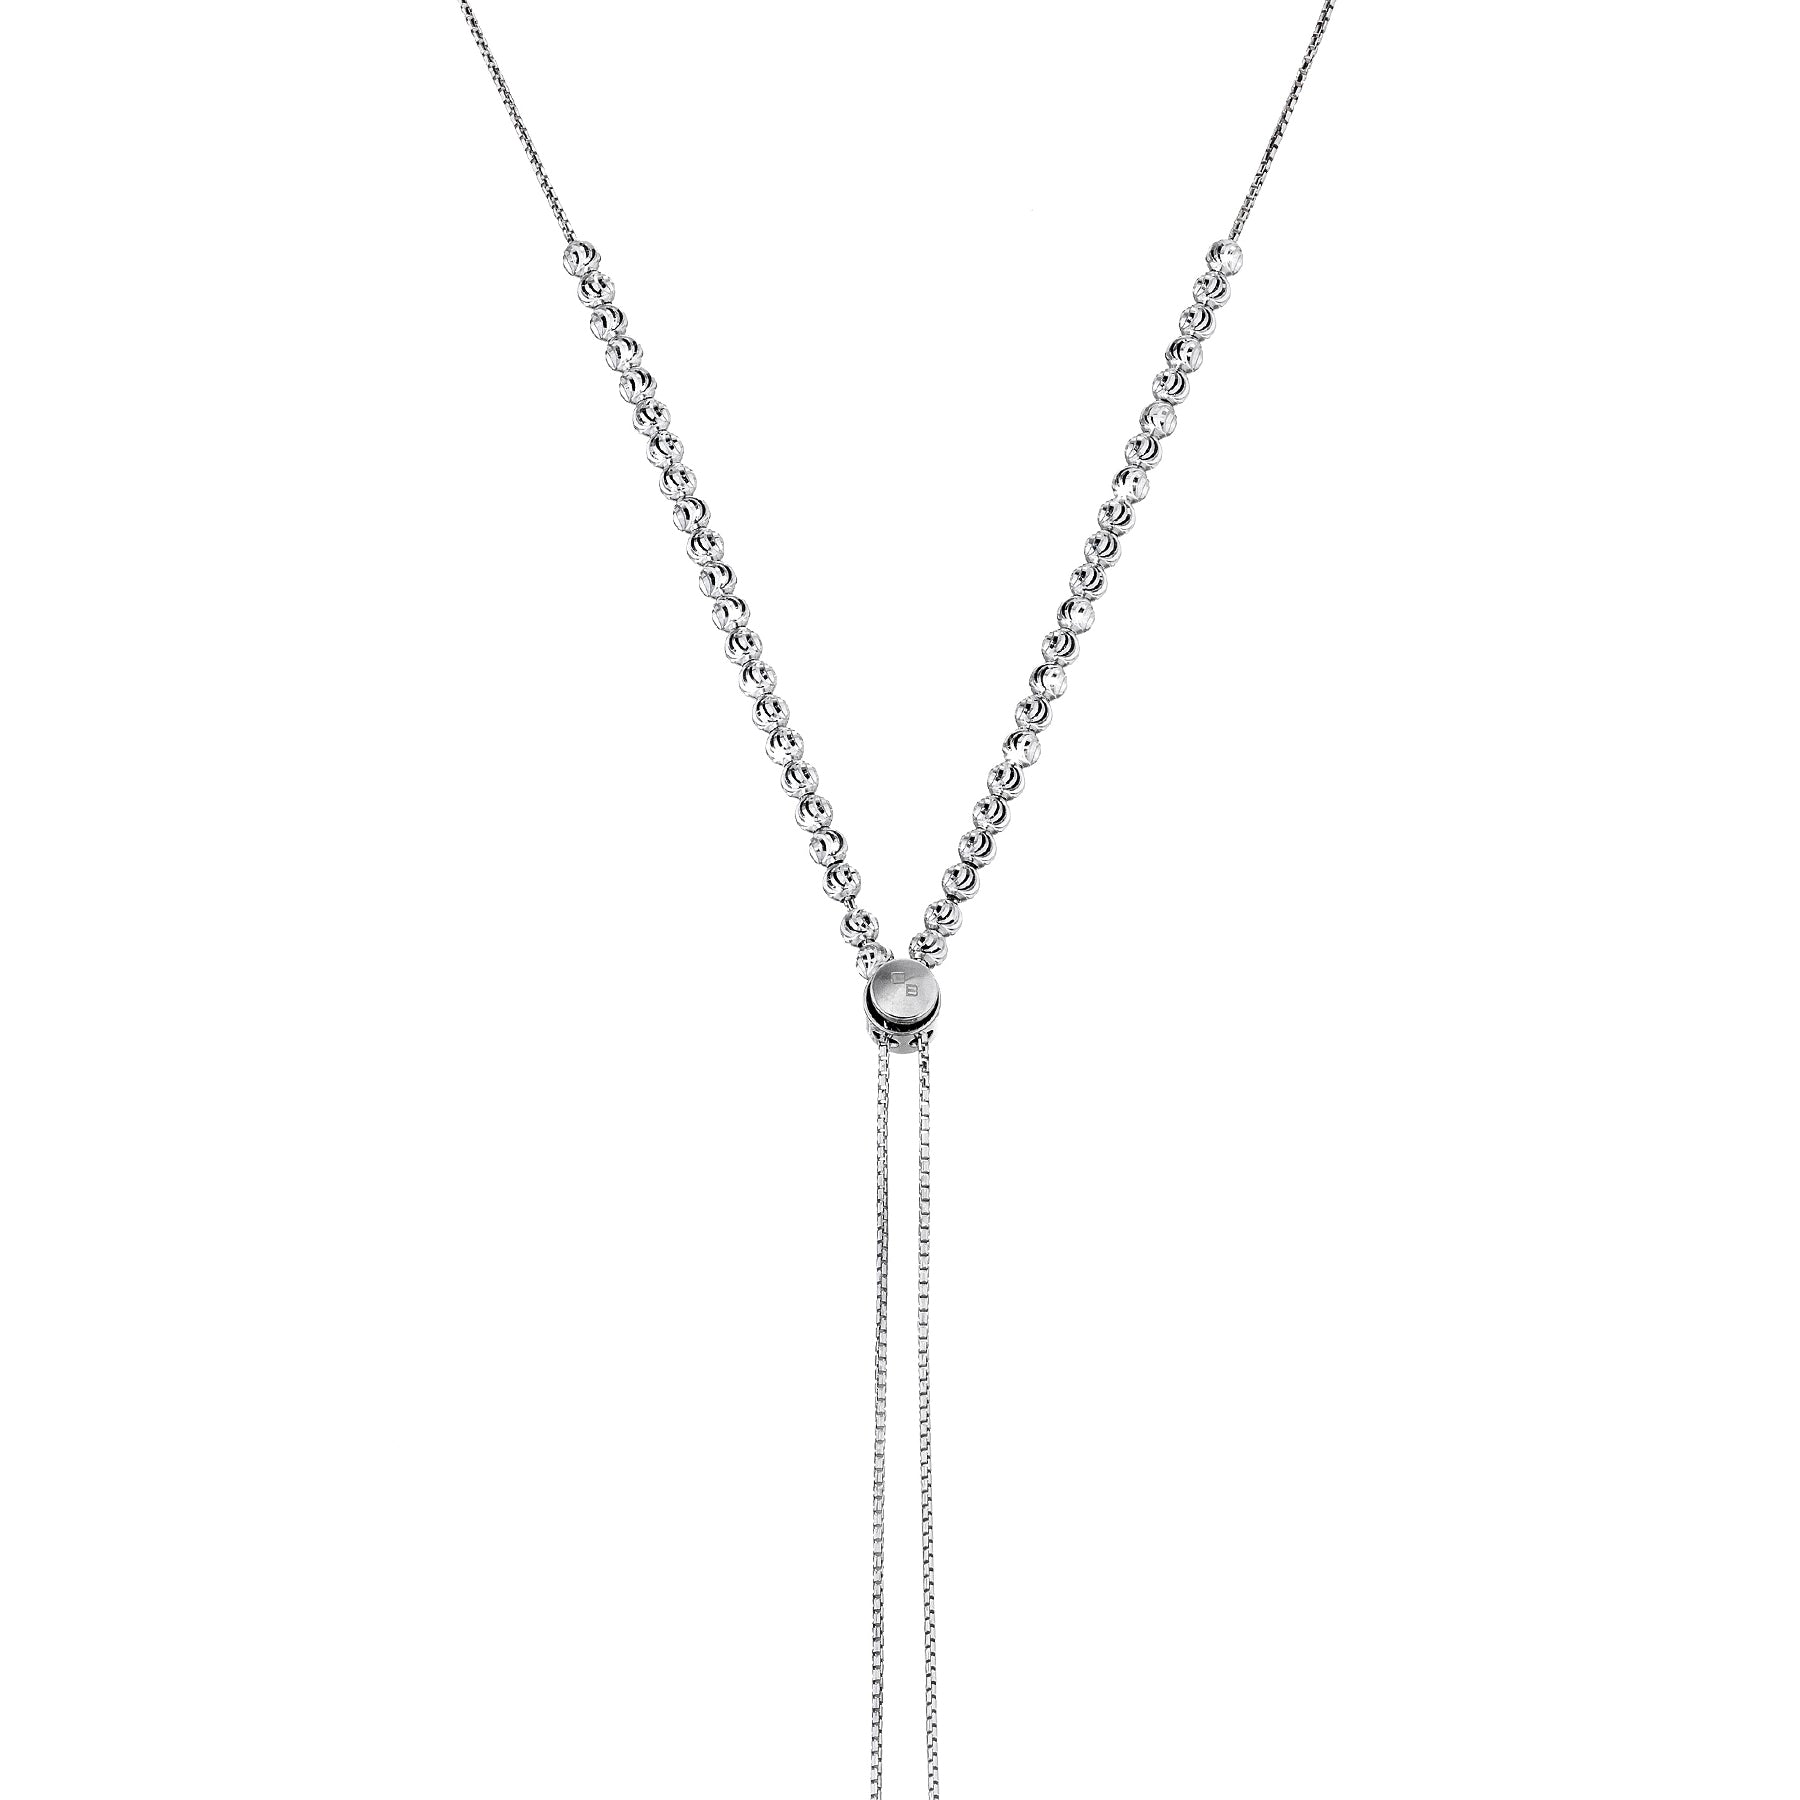 Adjustable Lariat Style Bead Necklace, Sterling Silver | Silver Jewelry ...